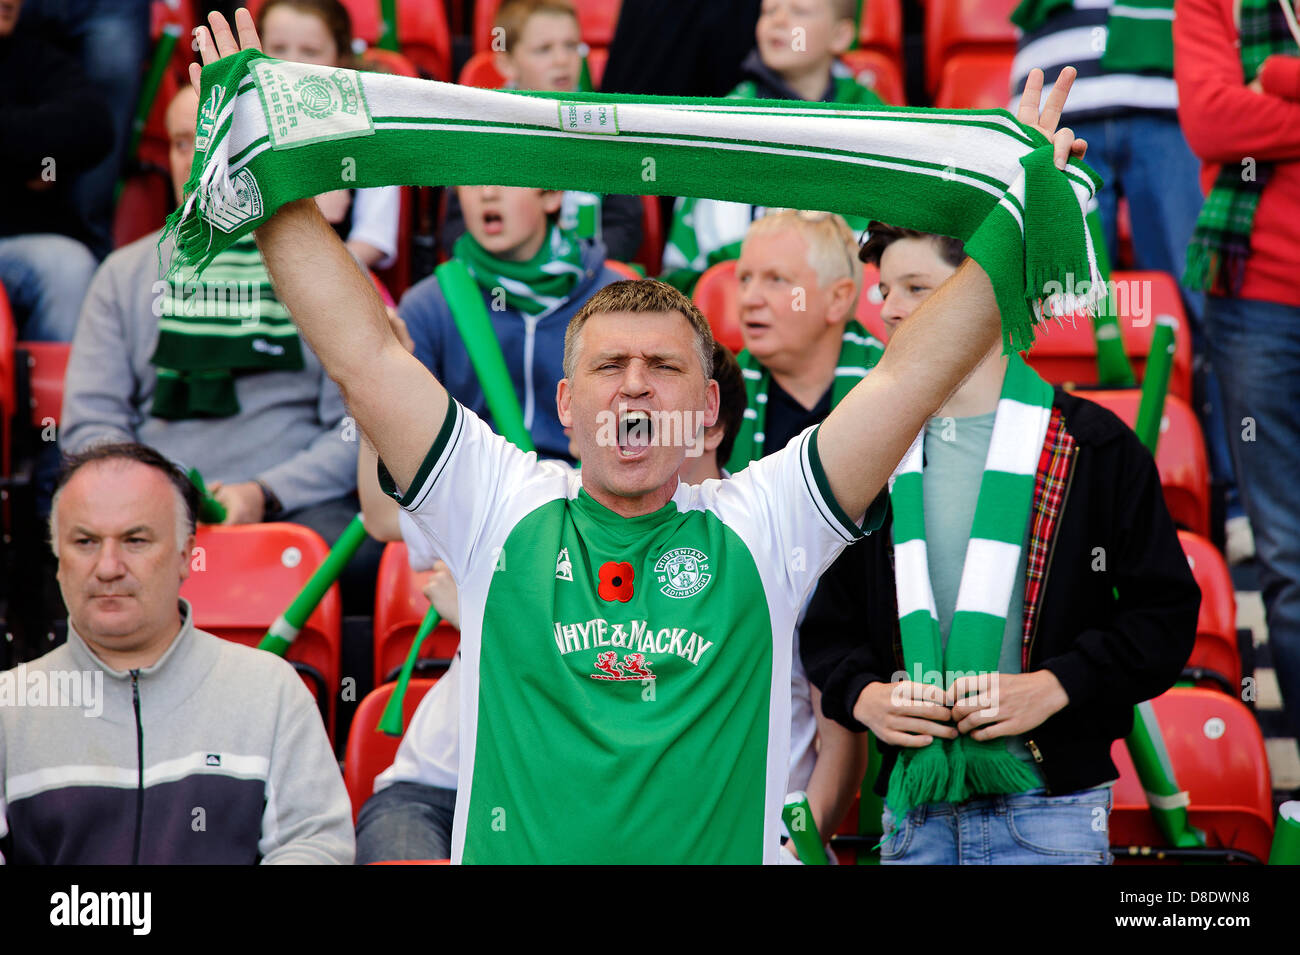 Glasgow, Scotland, UK. Sunday 26th May 2013. A Hibs fan tries to encourage his team during the Hibs v Celtic William Hill Scottish Cup Final at Hampden Park Stadium. Credit: Colin Lunn / Alamy Live News Stock Photo